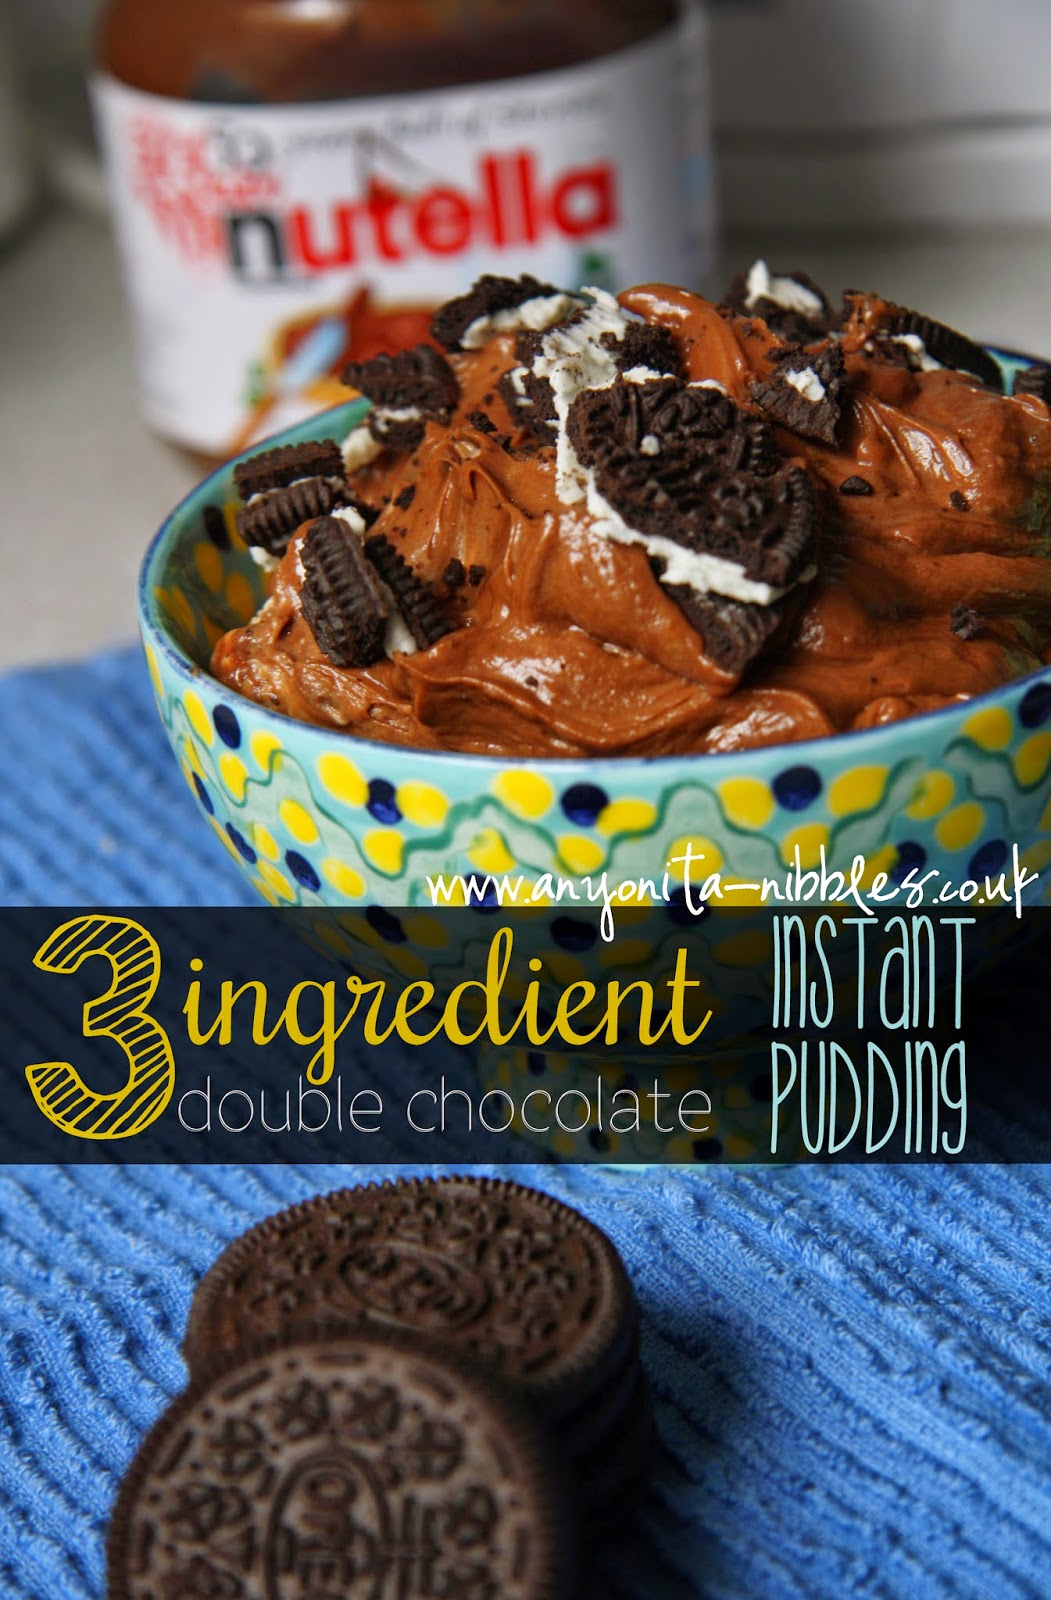 3 ingredient double chocolate instant pudding from anyonita-nibbles.co.uk